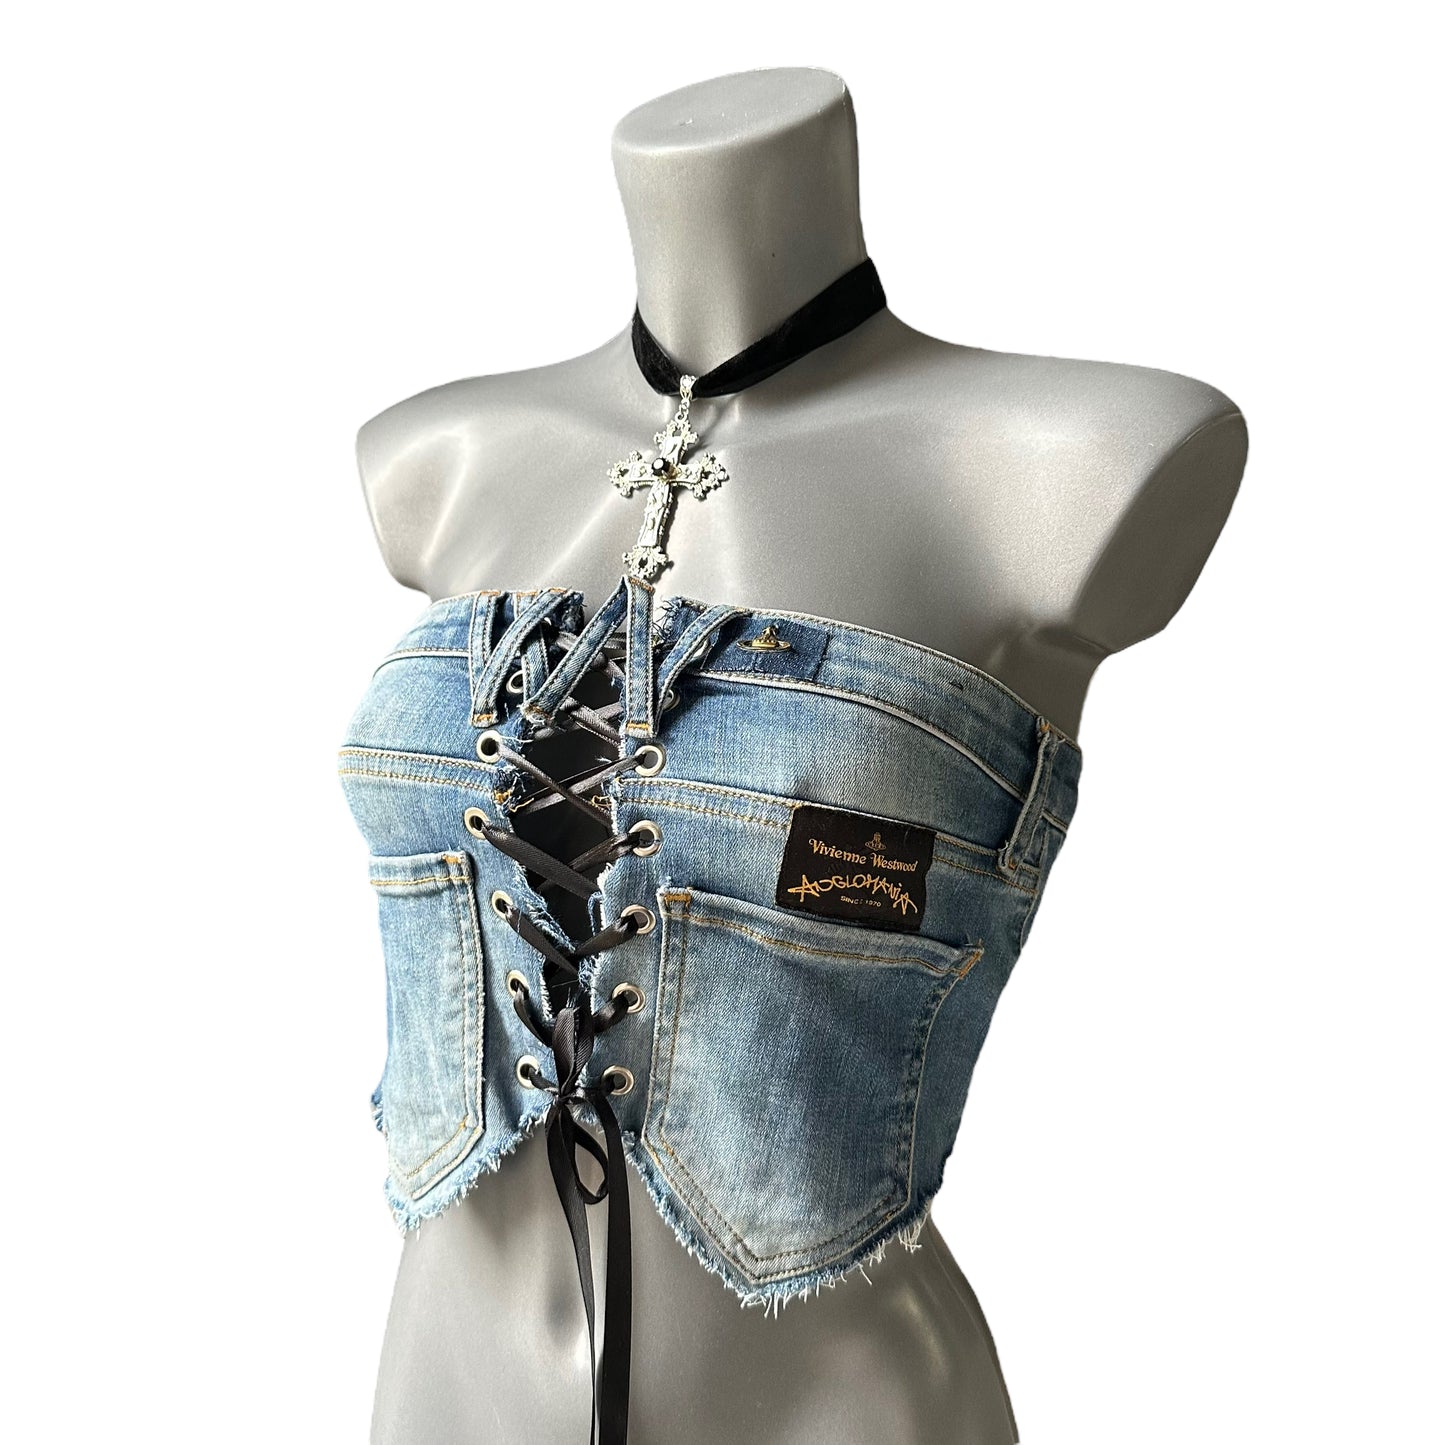 Authentic Vivienne Westwood Anglomania Jeans Reworked into a Denim Corset Top 6 8 10